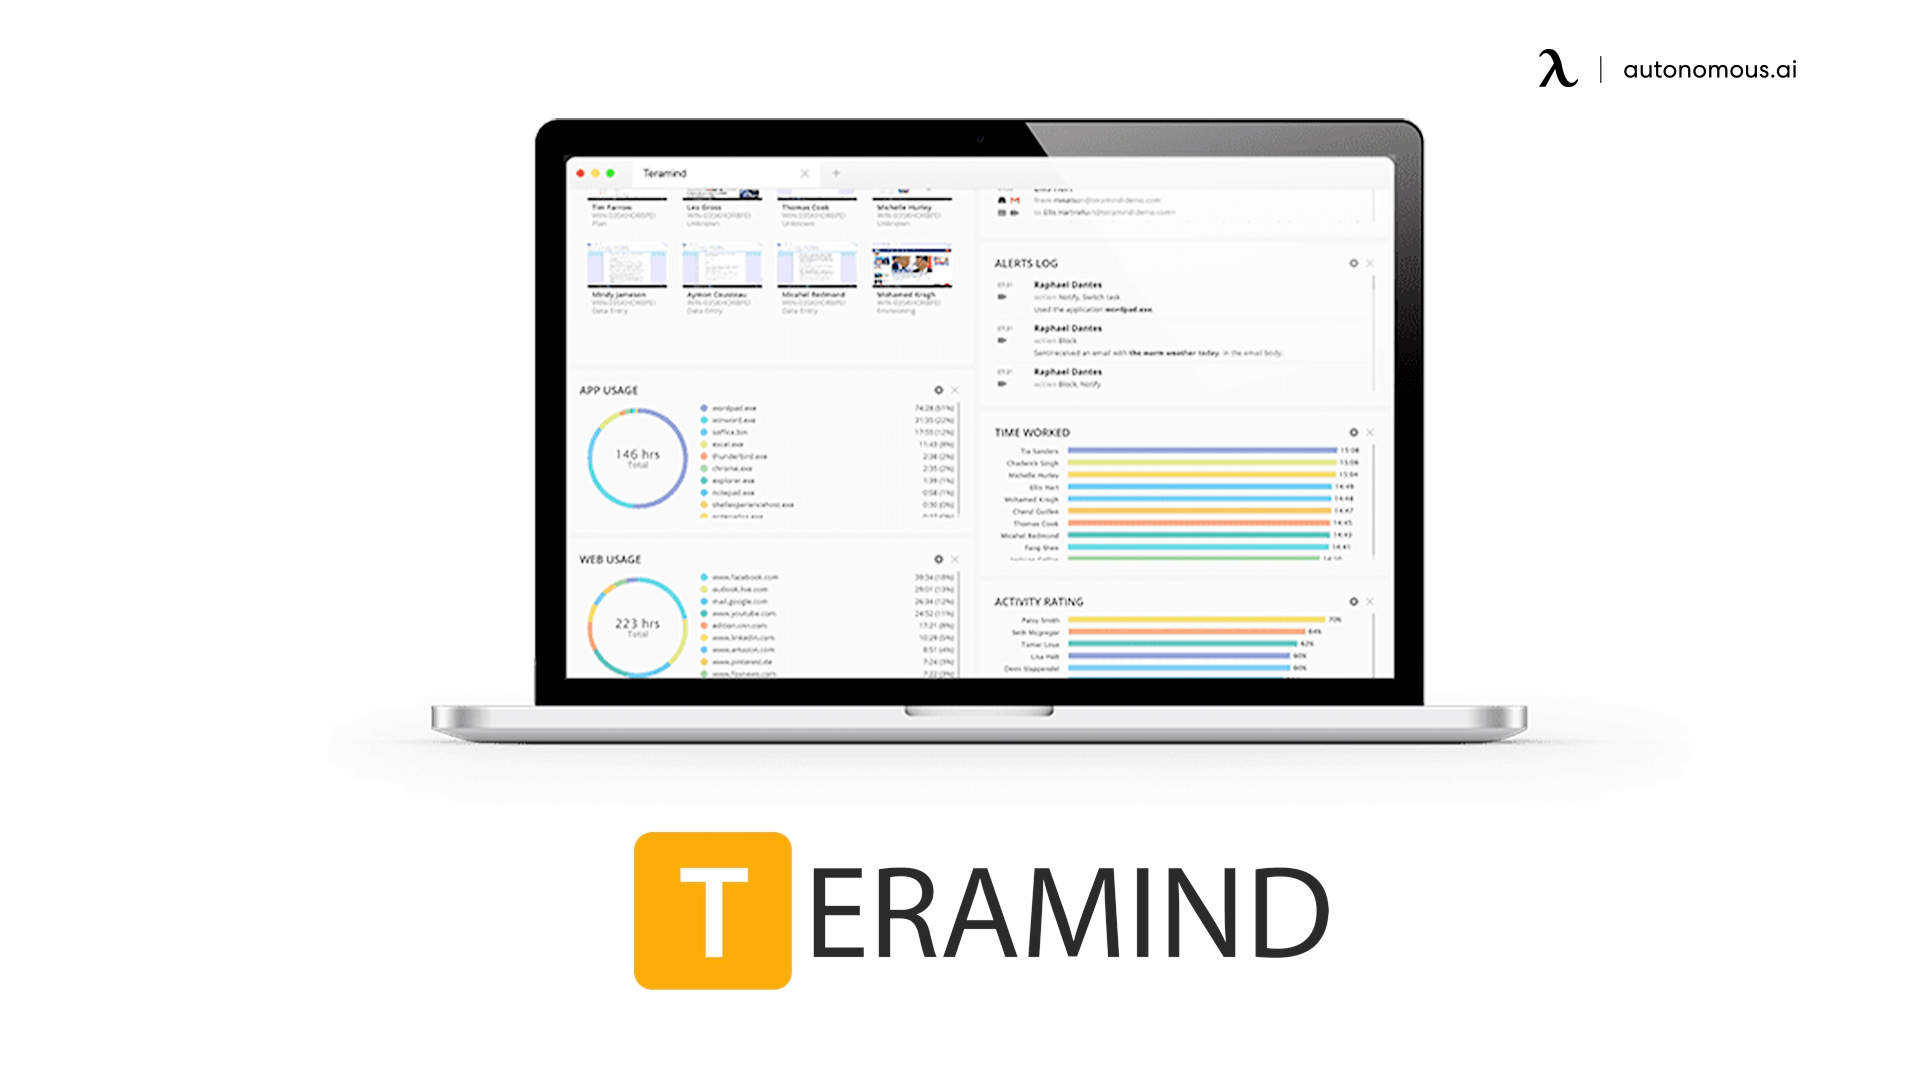 Teramind is a very efficient employee productivity tracking software.